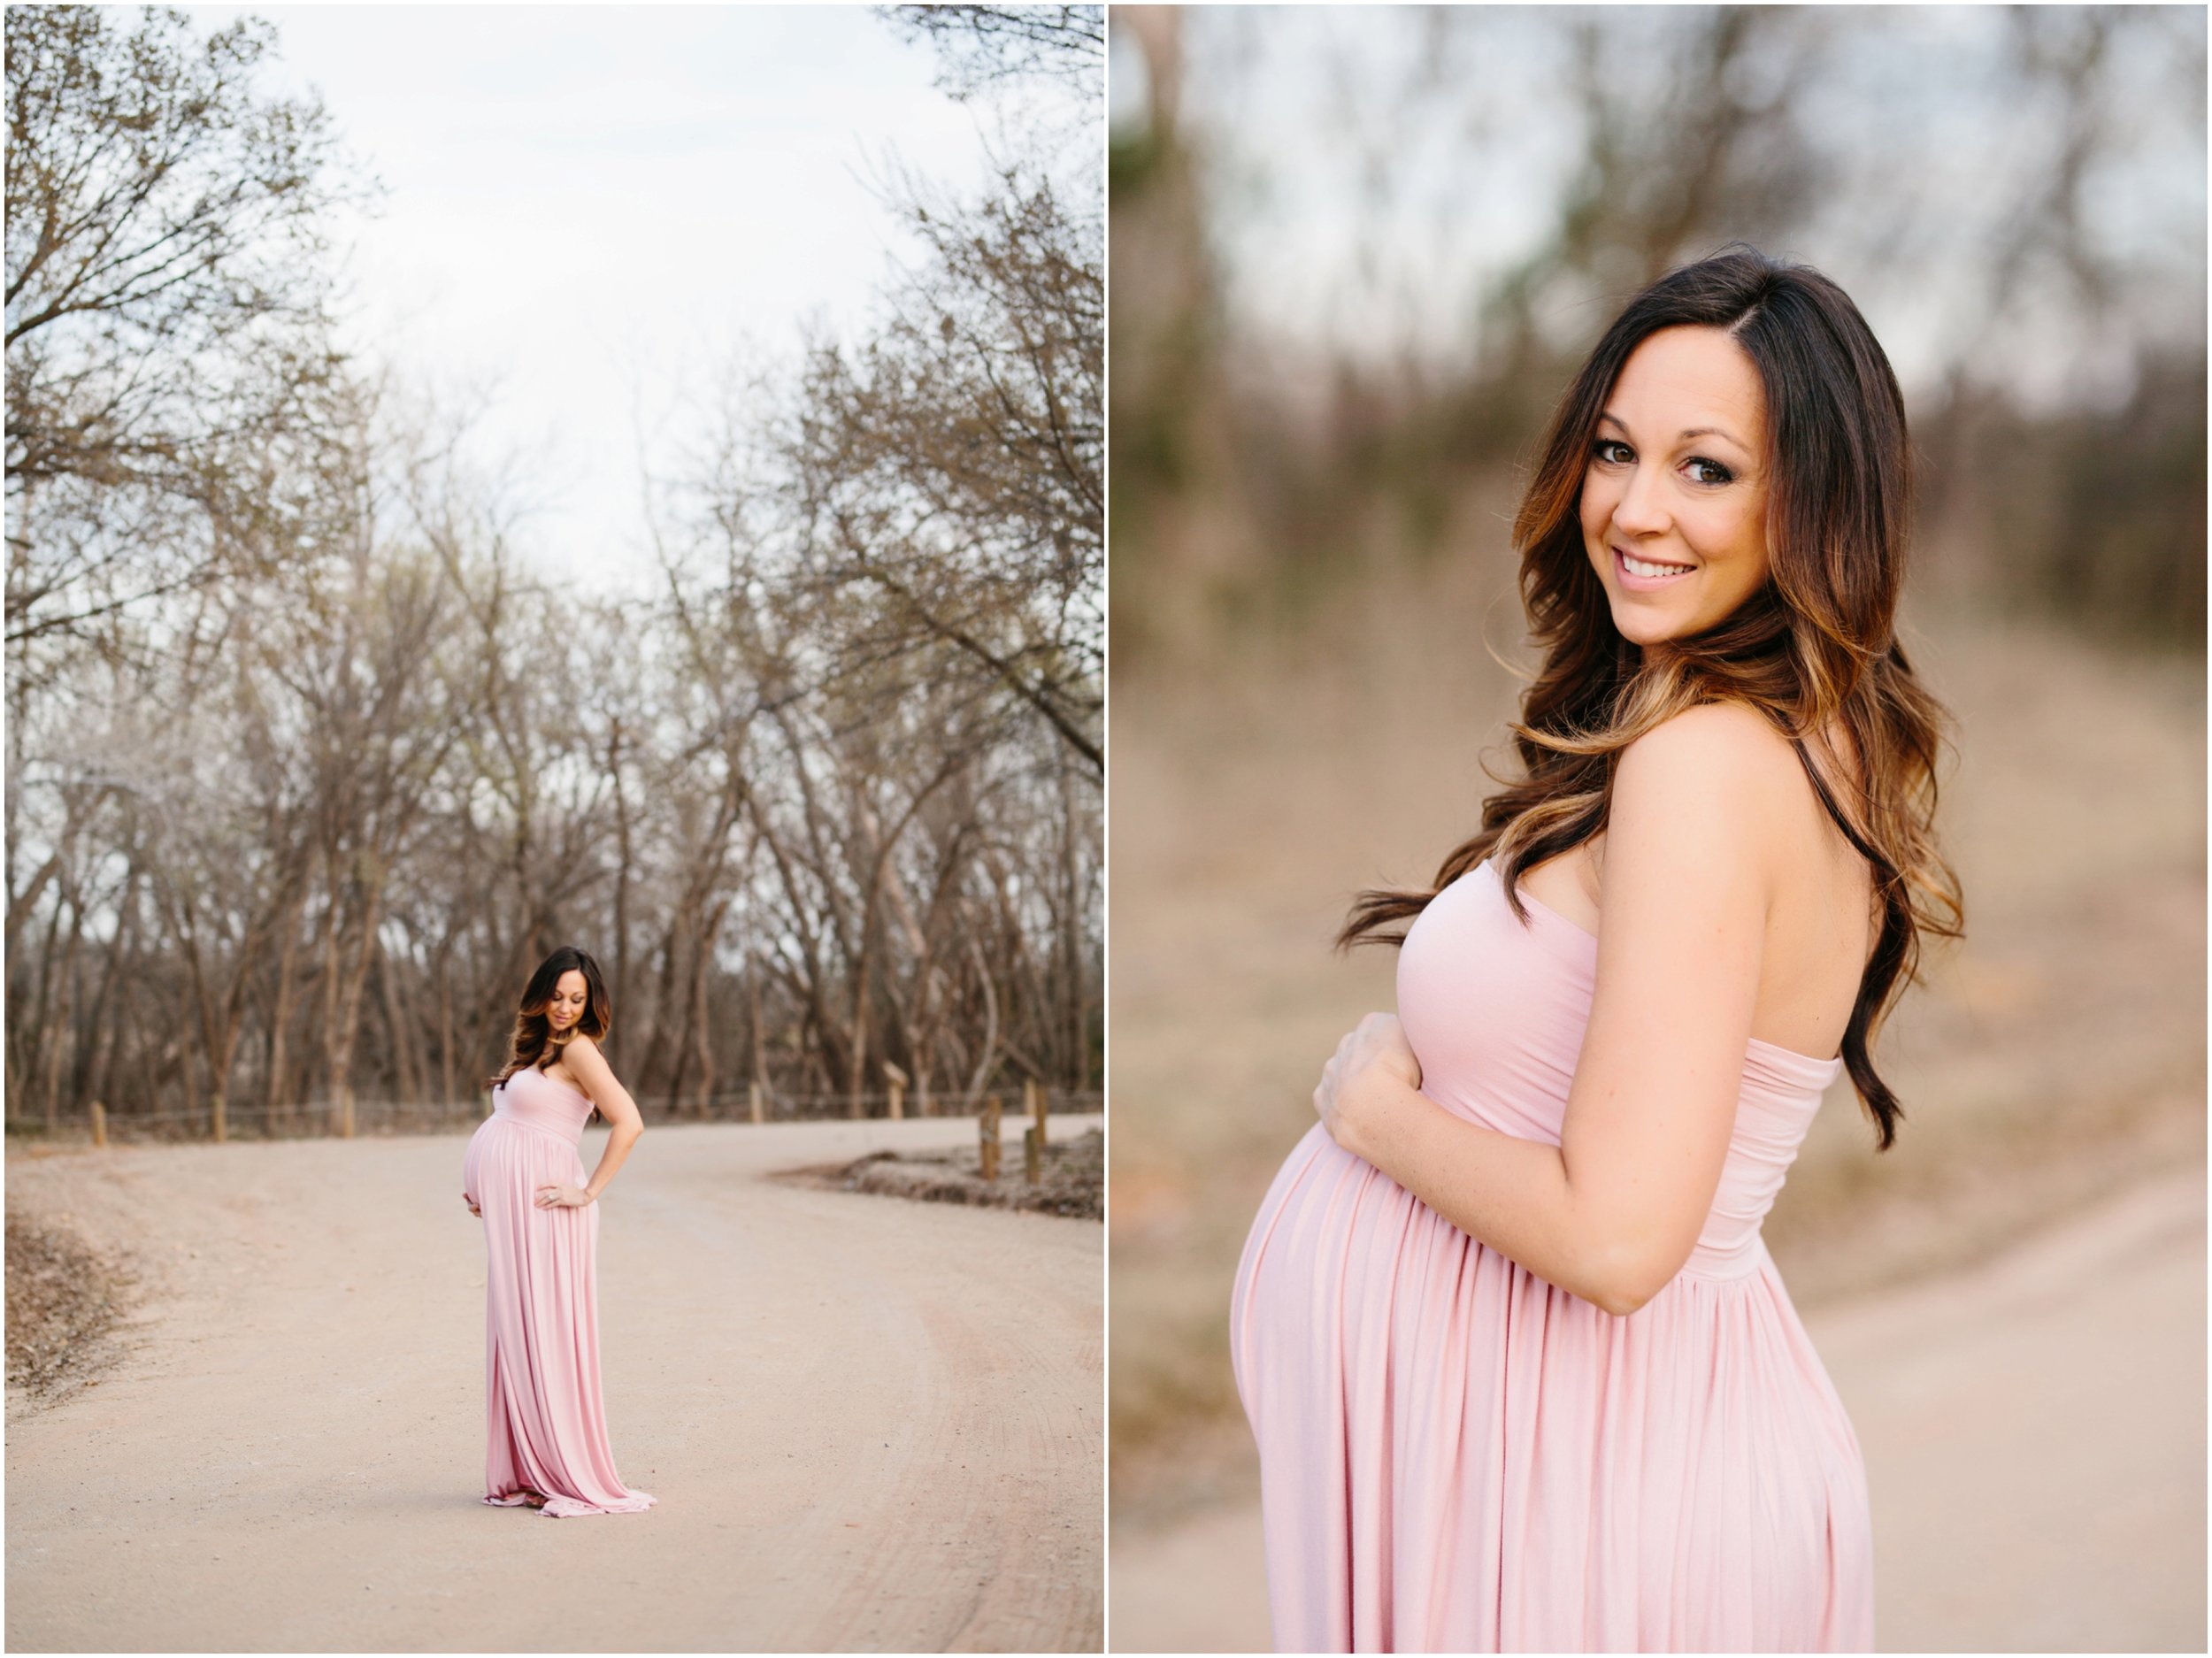 posed maternity photo with shallow depth of field outside 85mm lens